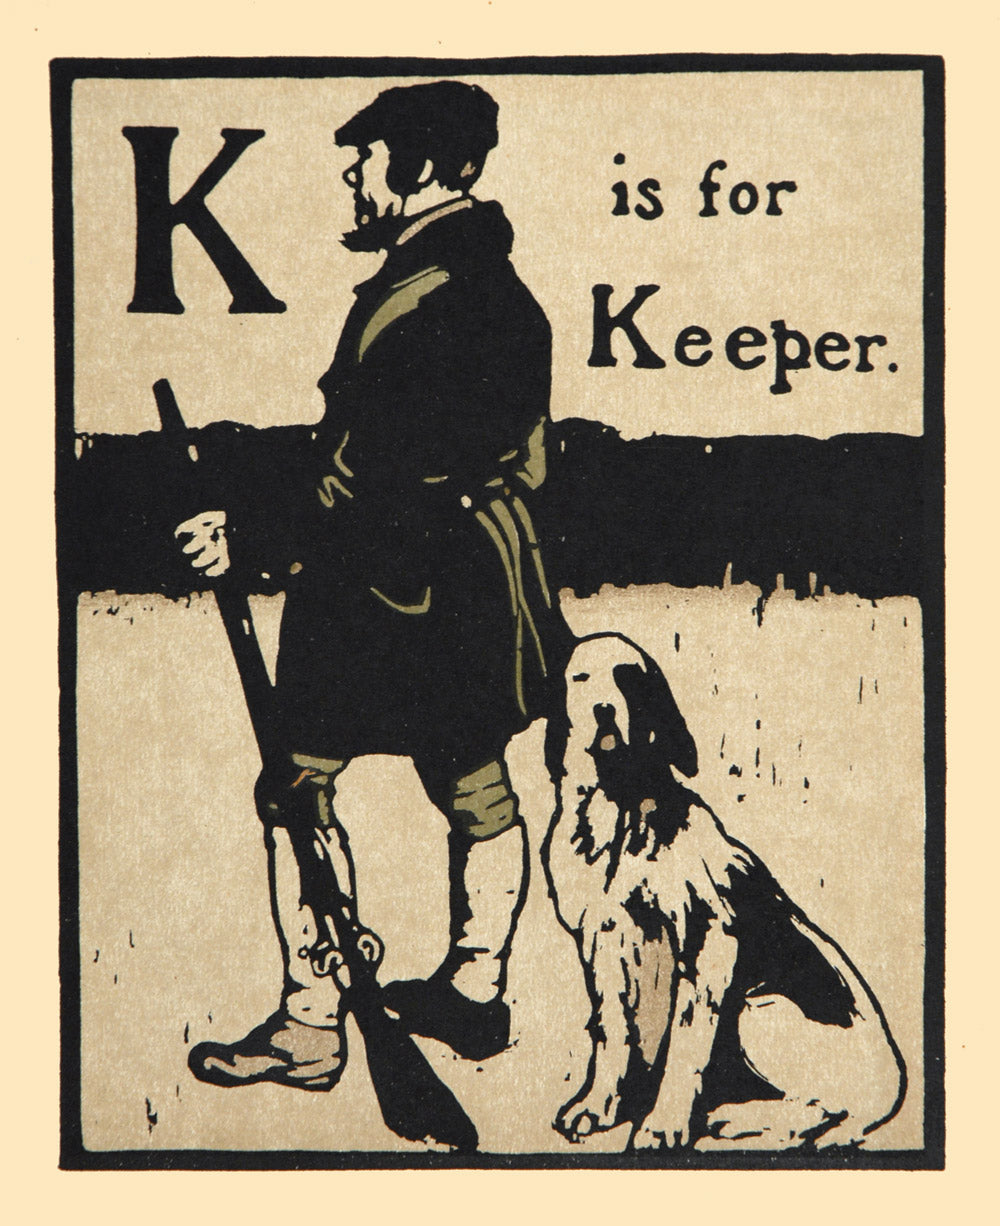 K is for Keeper